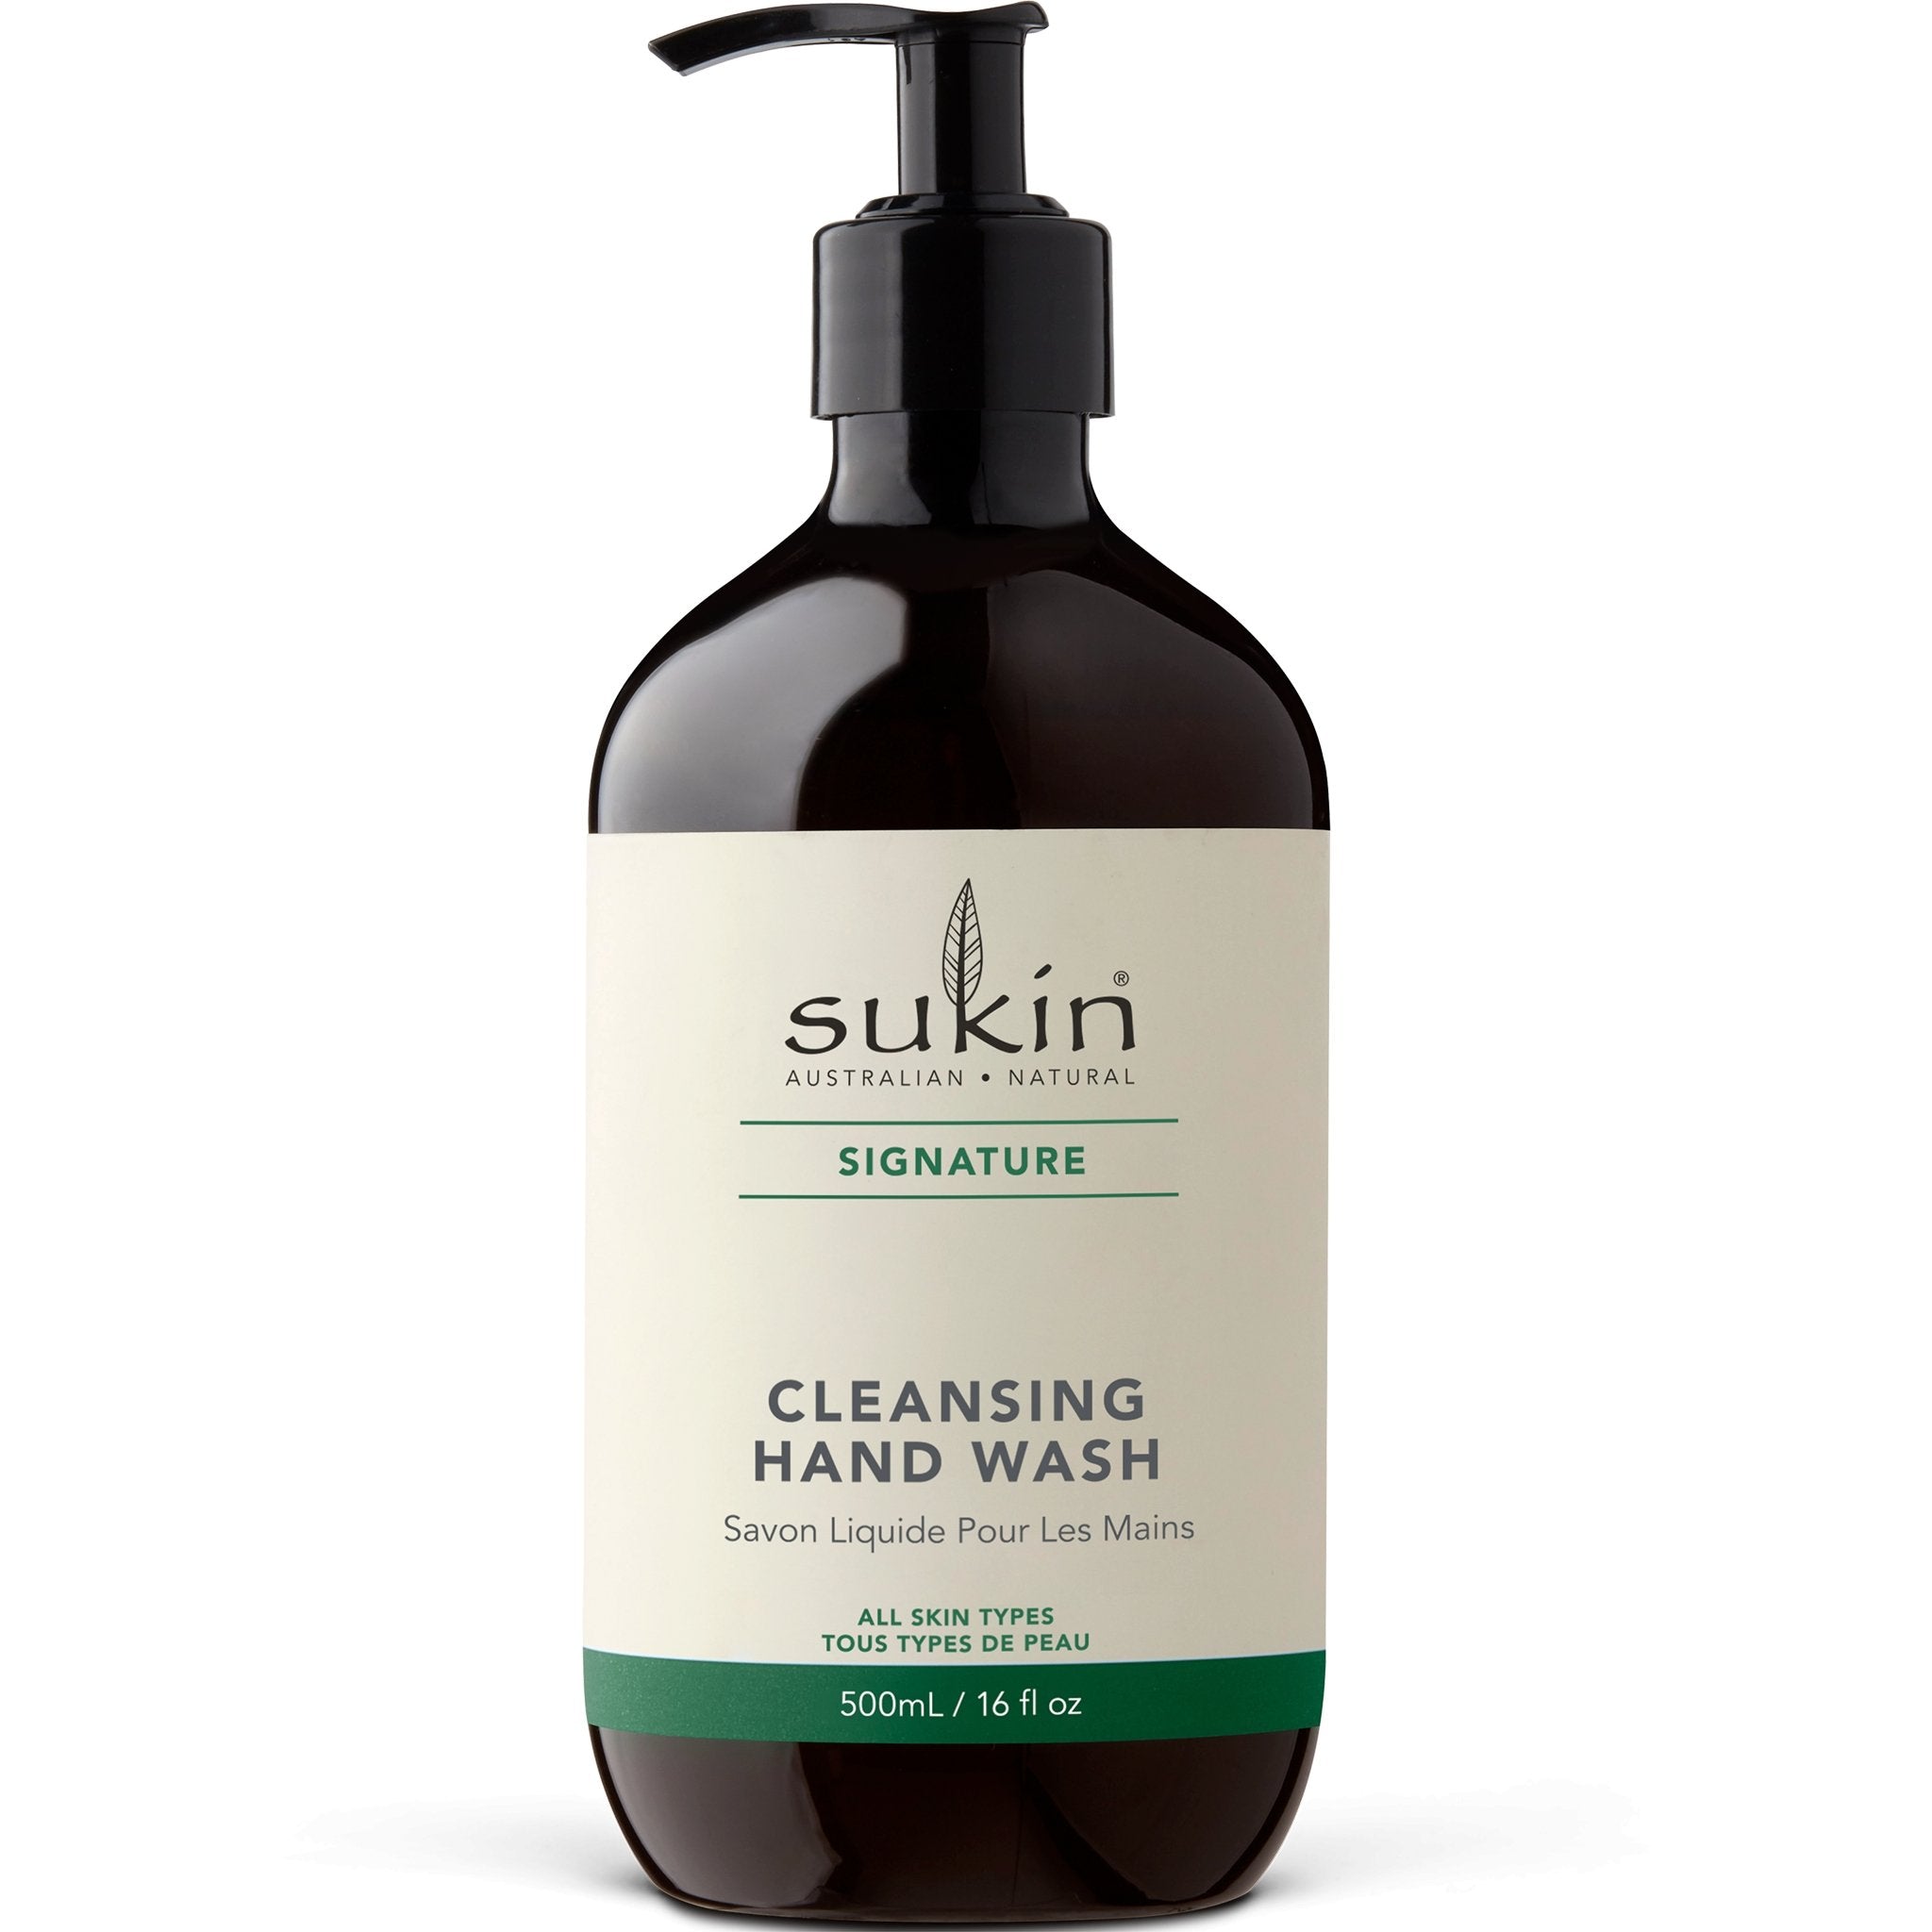 Signature | Cleansing Hand Wash